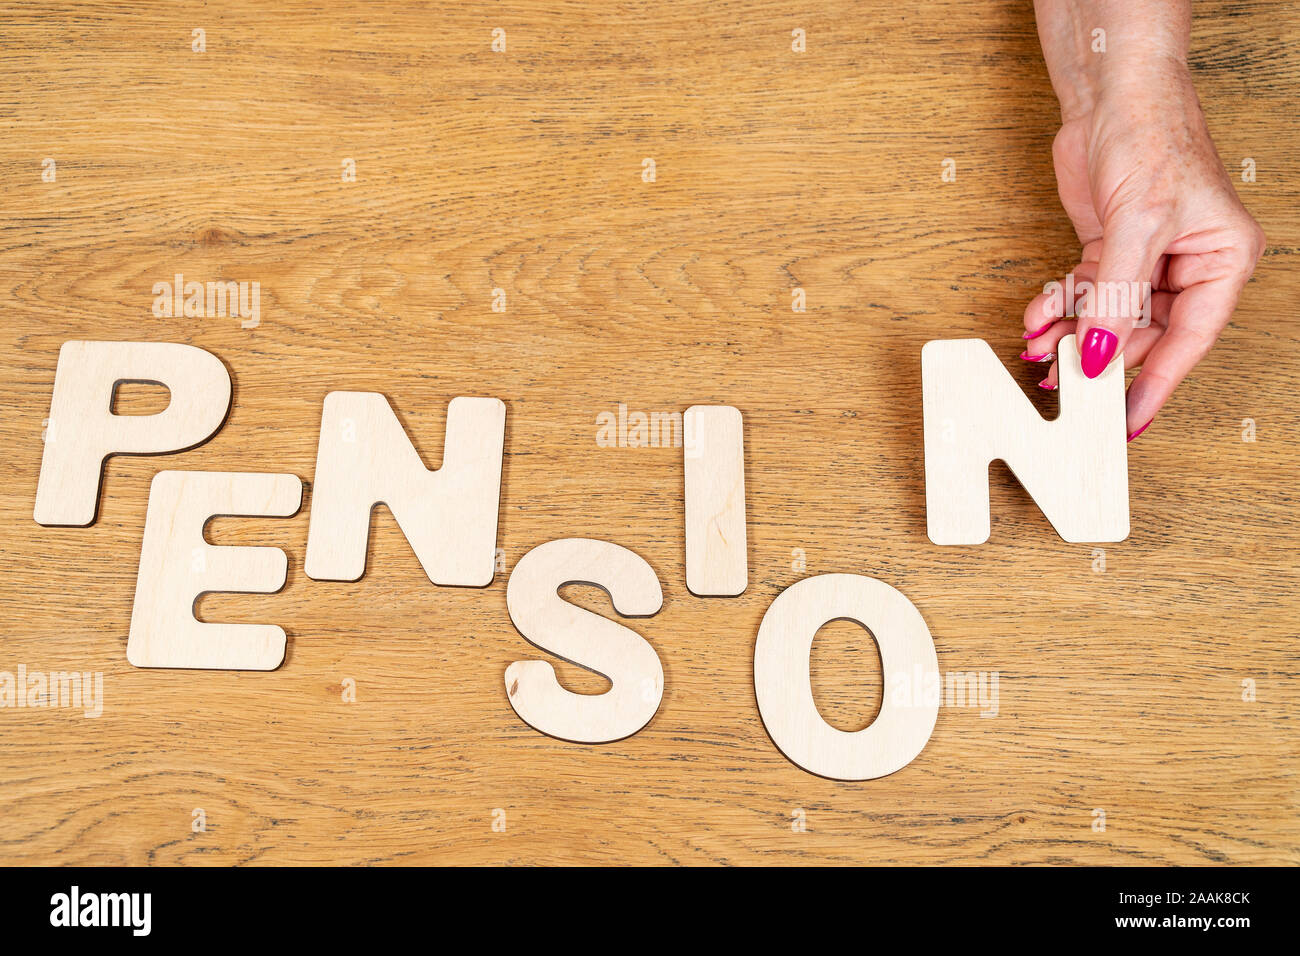 old woman hands laid out the word pension on a wooden board Stock Photo